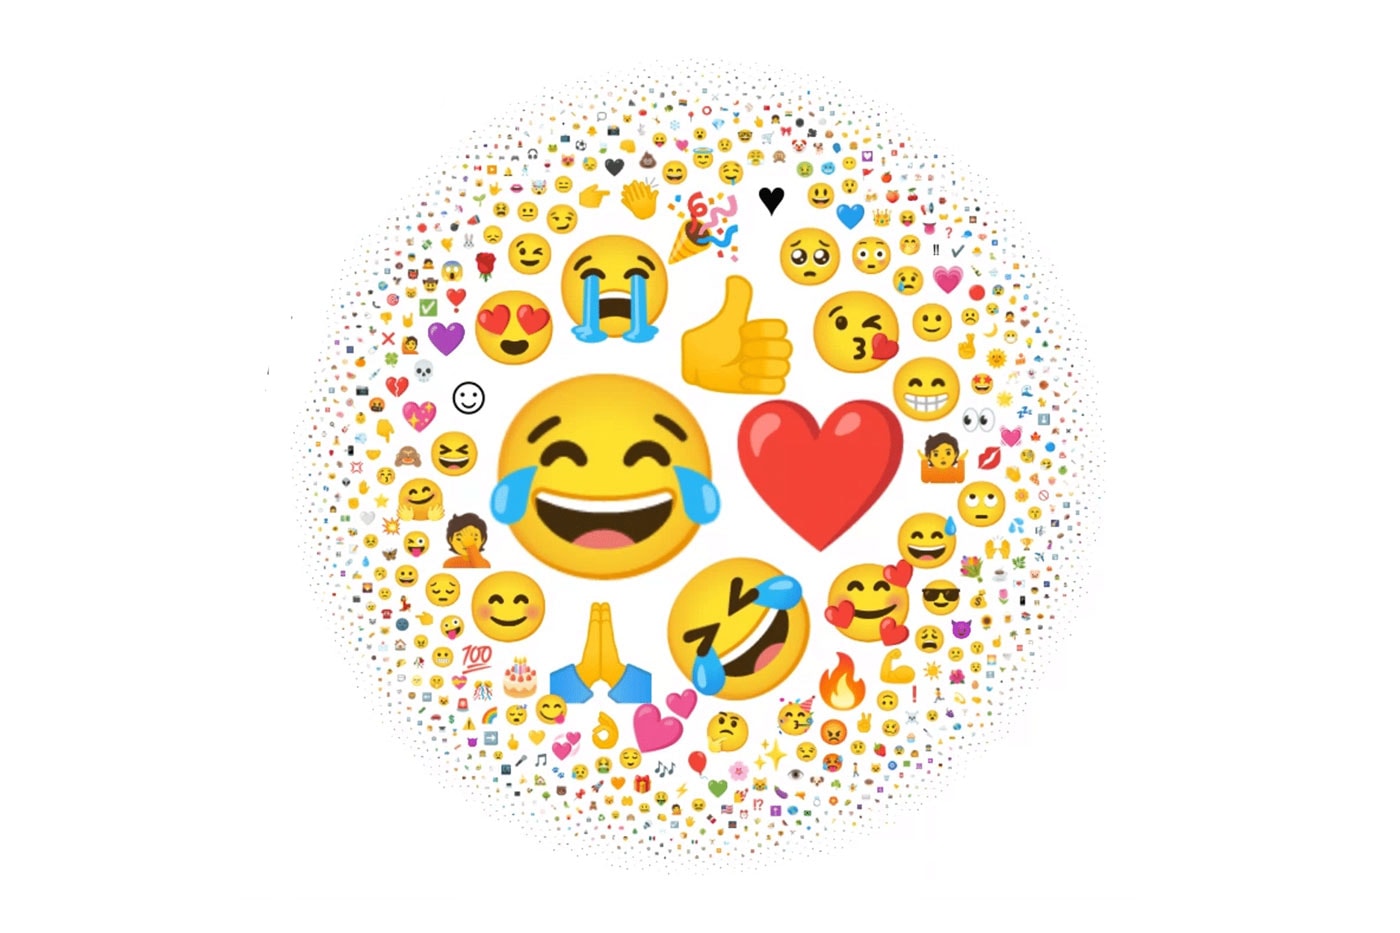 Here Are the Most Frequently Used Emojis of 2021 crying face strong arm ghost heart eyes flexed biceps rocket ship butterfly person doing cartwheel plant-flower iphone android clown